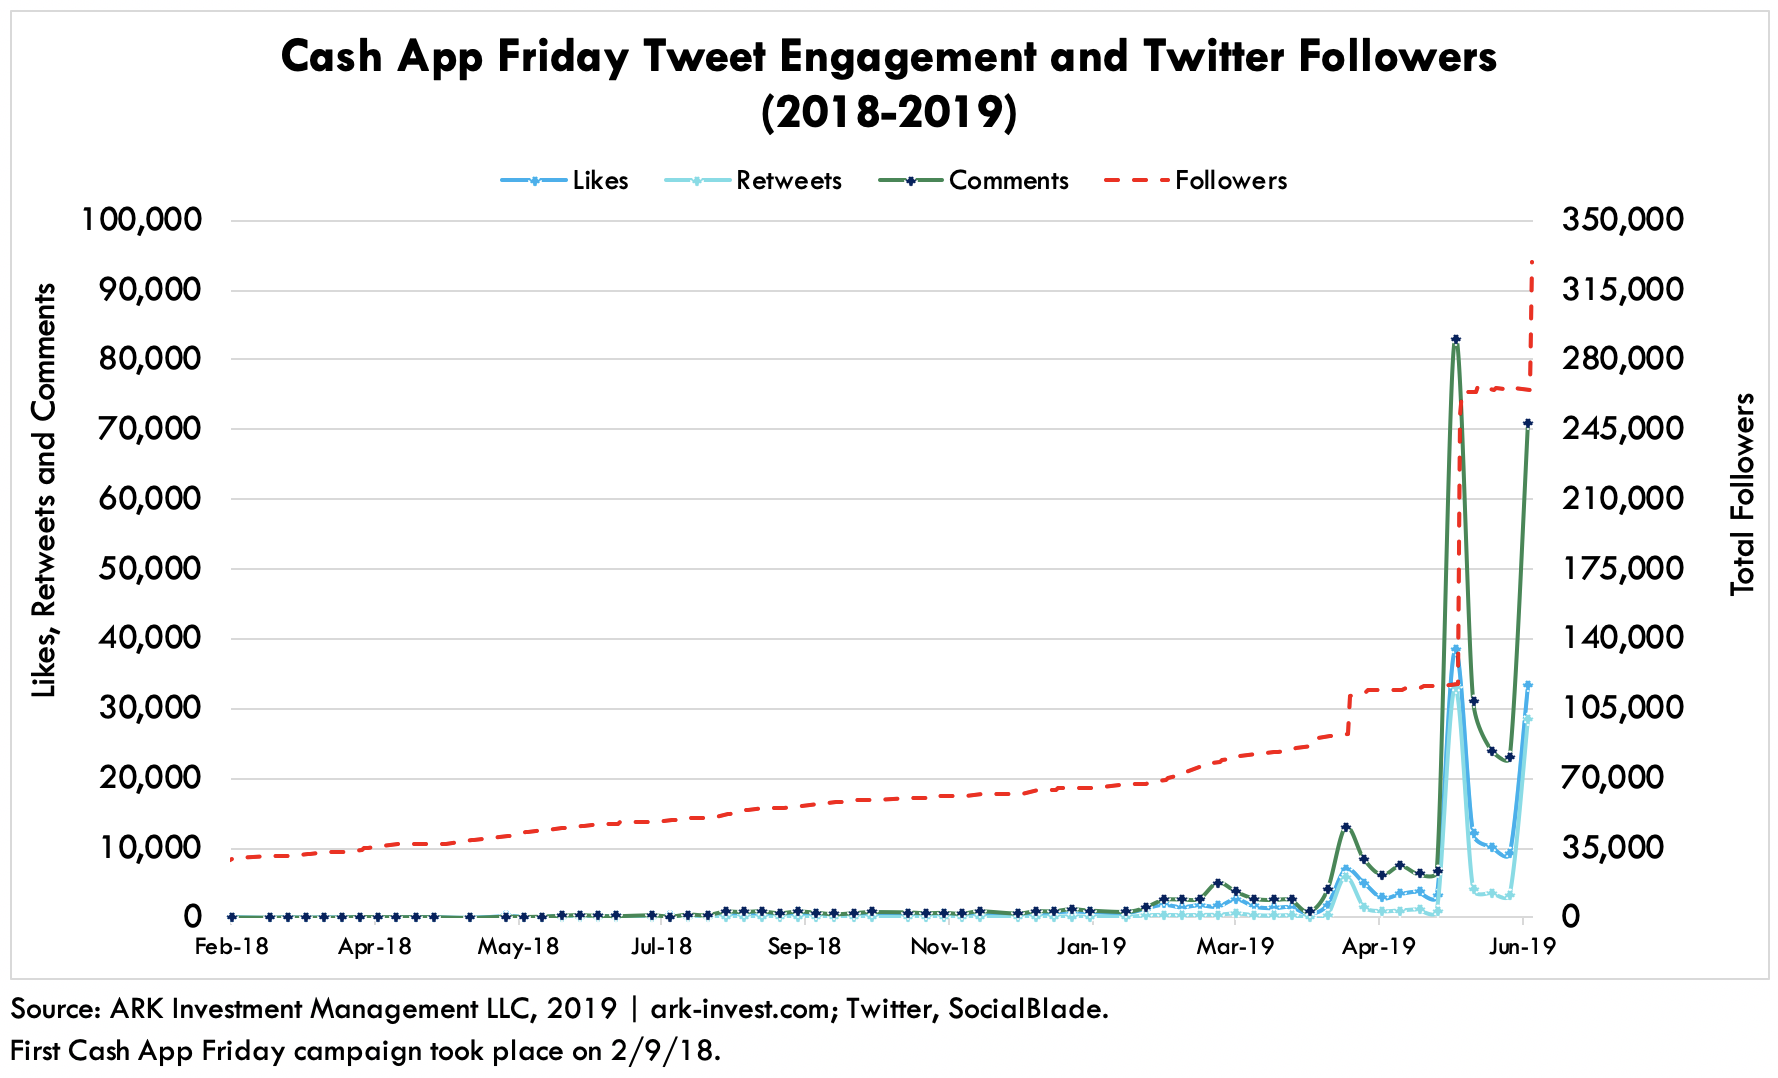 Cash App Twitter Engagement and Followers